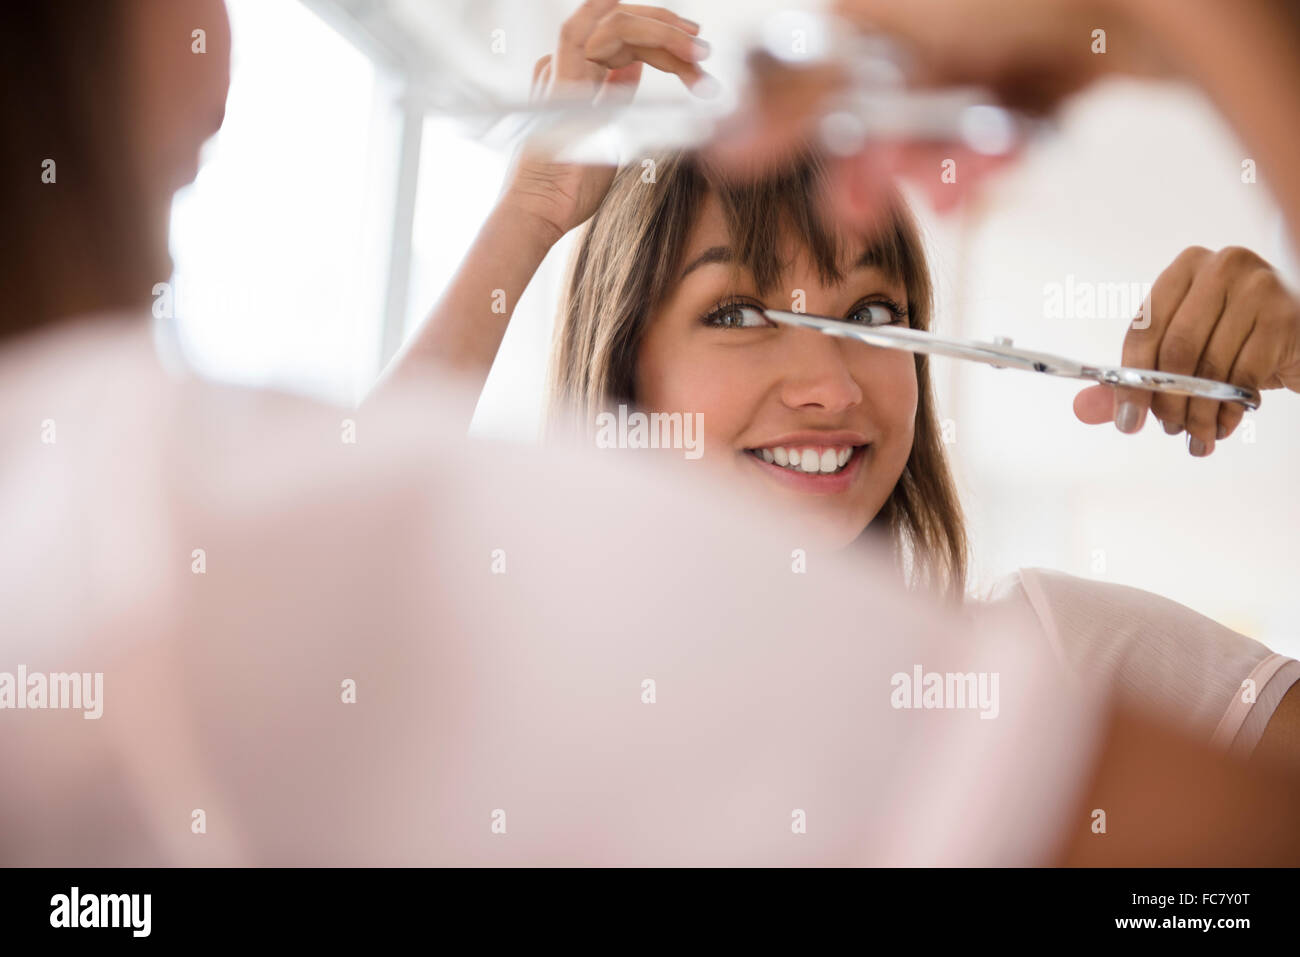 Mixed race woman trimming her bangs Stock Photo